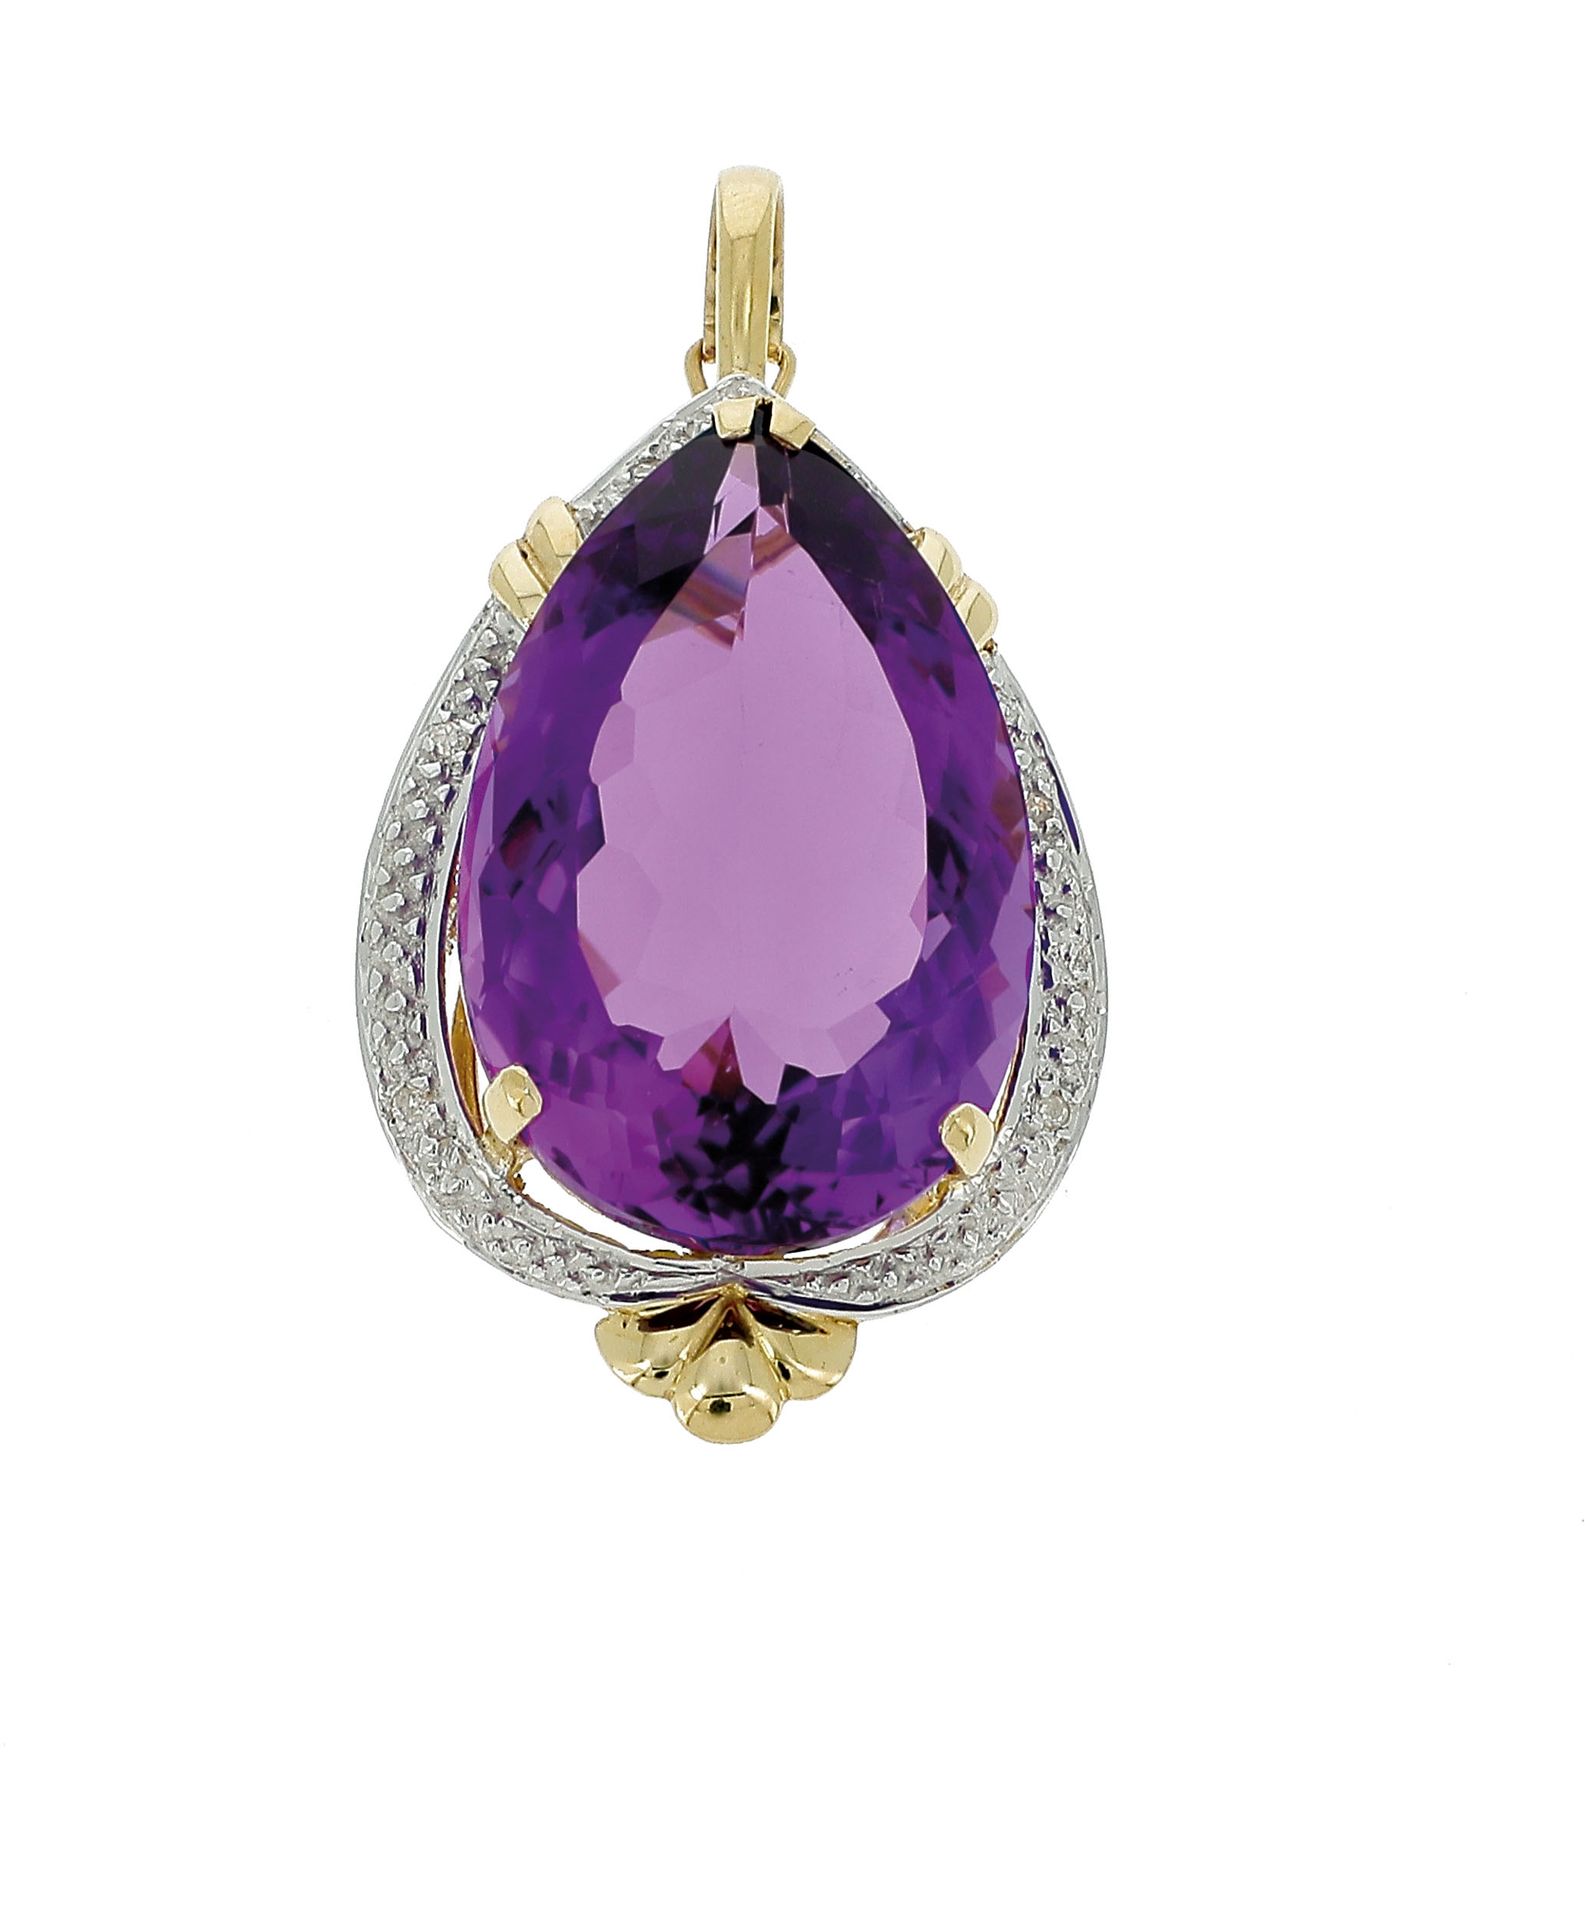 Null PENDANT

Yellow gold pendant with a large pear-shaped amethyst in a white g&hellip;